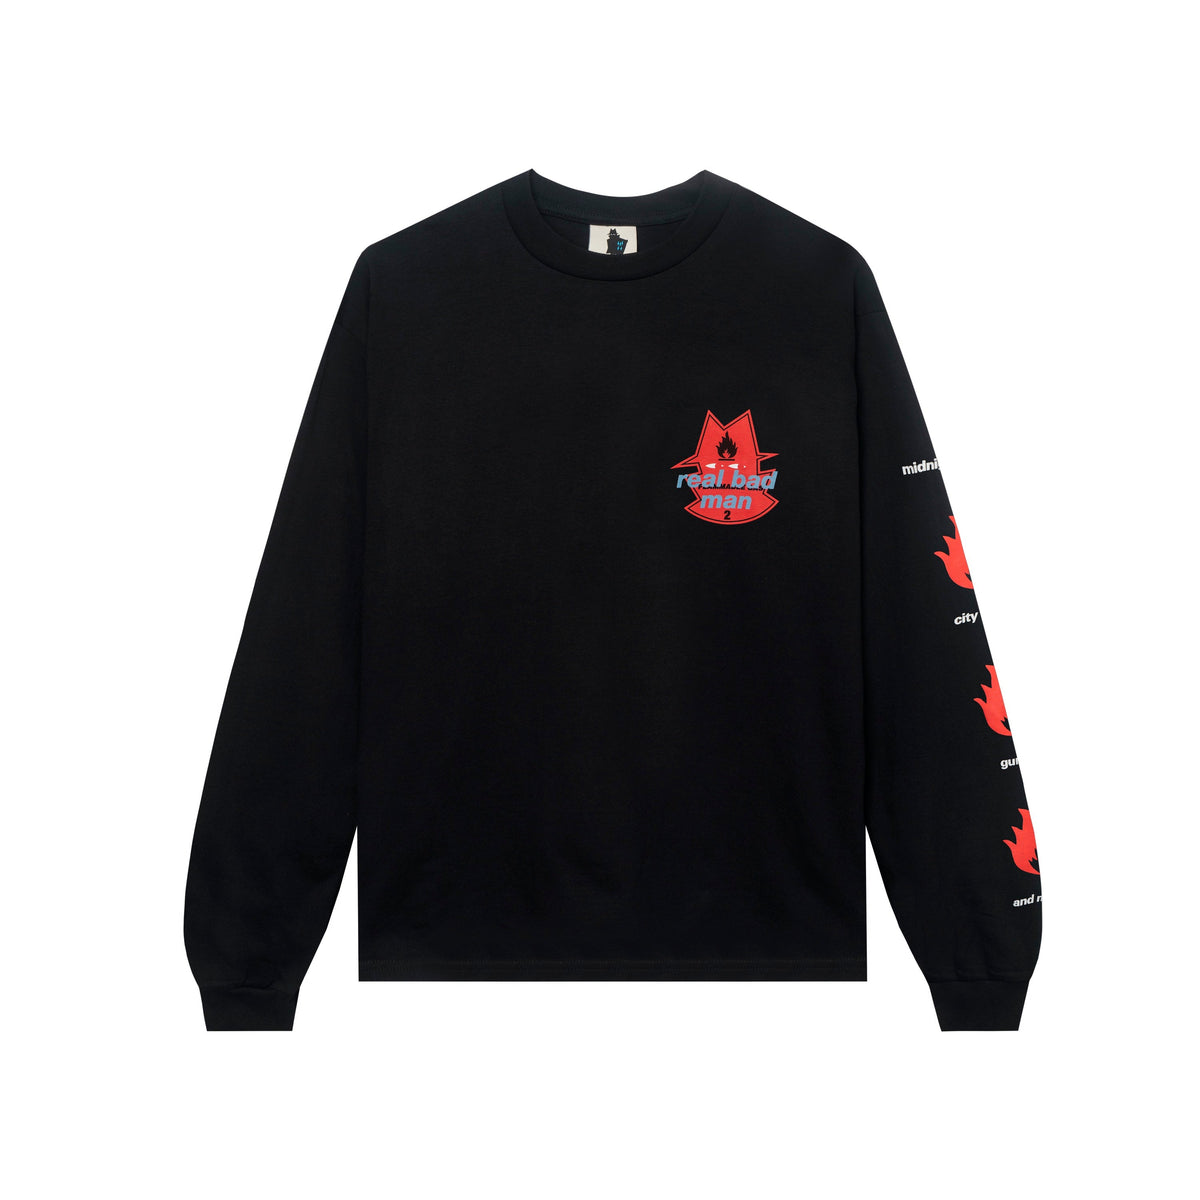 FLAMMABLE GAS L/S TEE